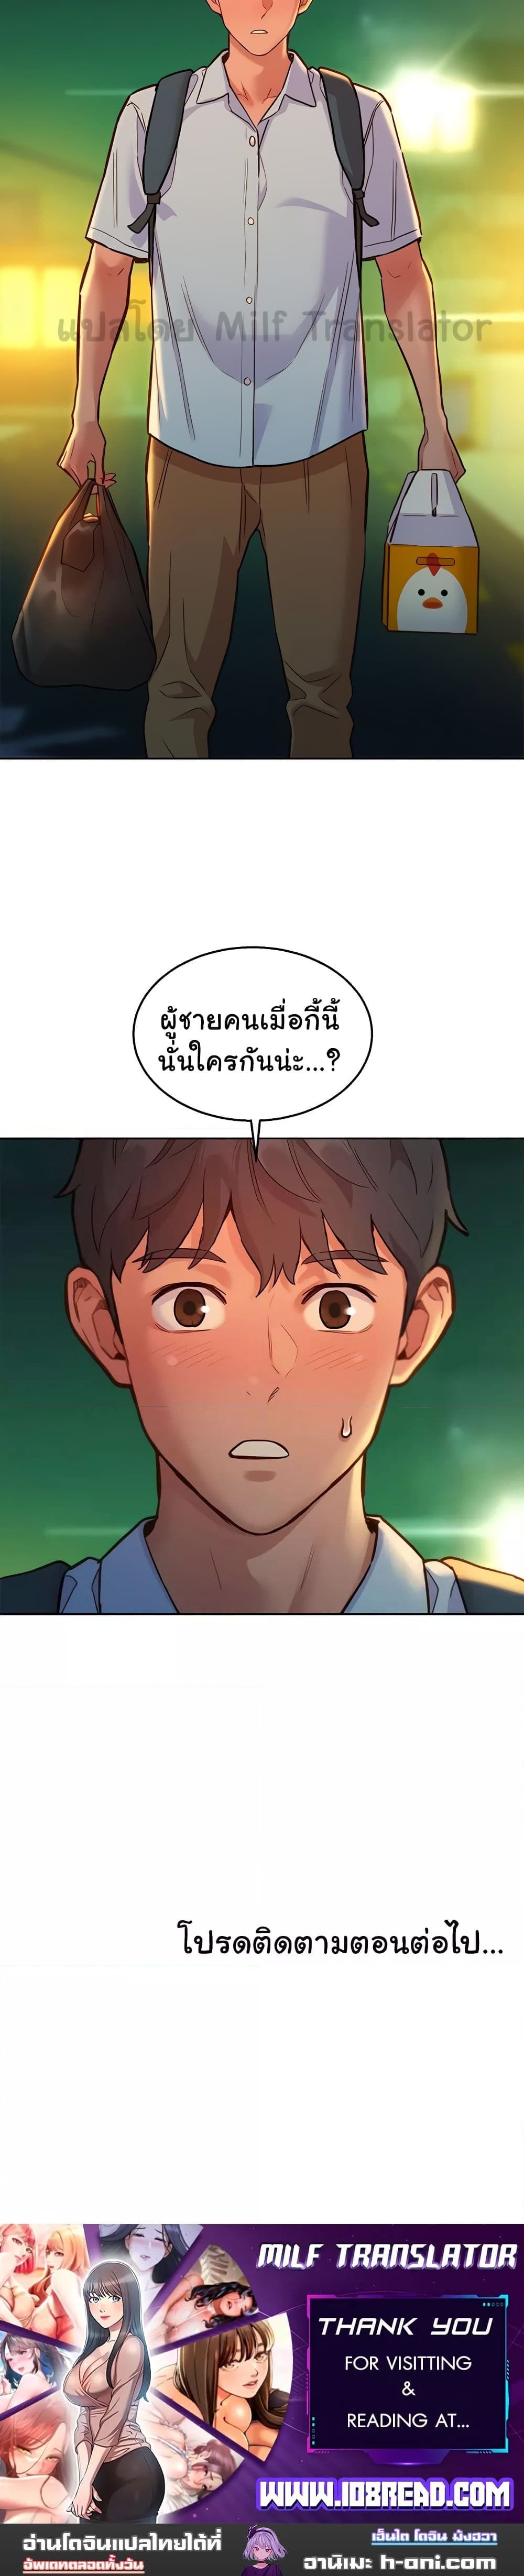 Let’s Hang Out from Today ตอนที่ 46 ภาพ 13